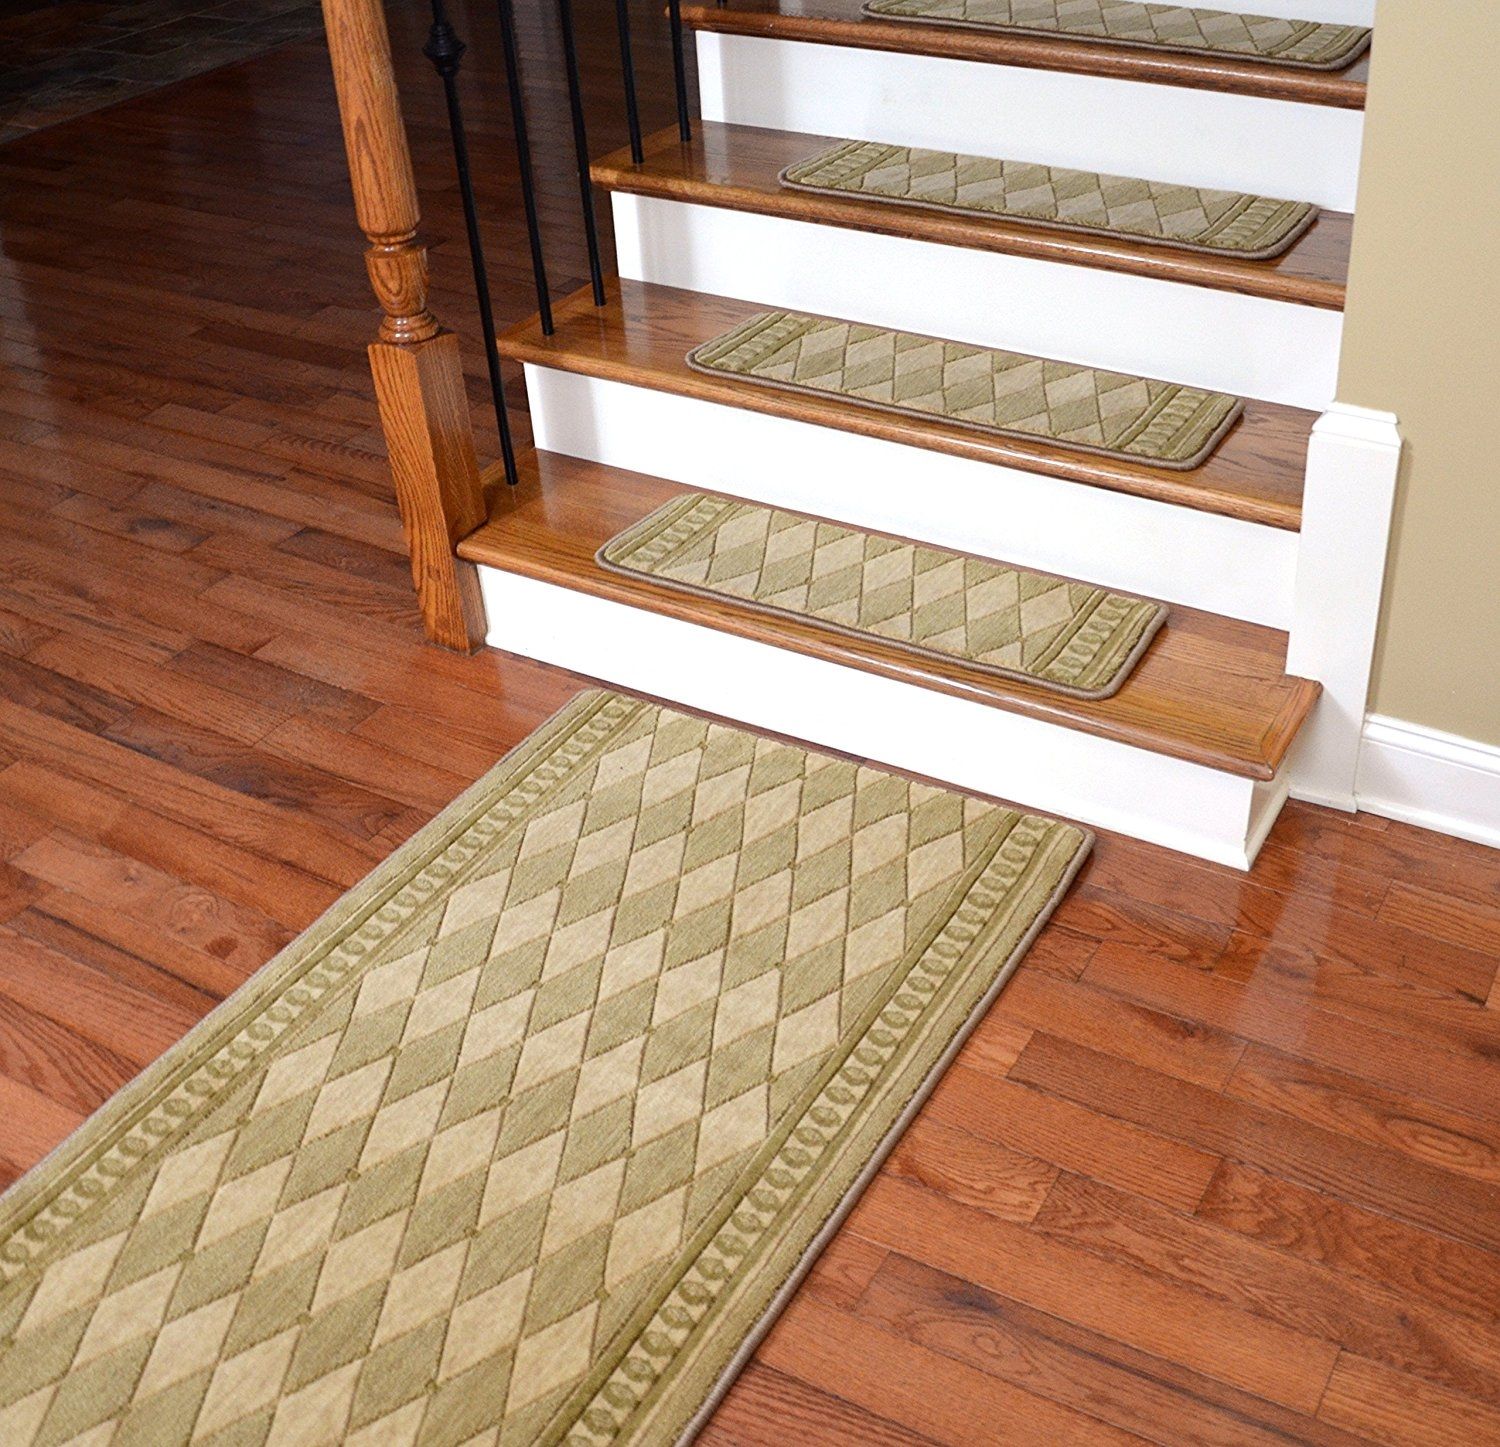 Amazon Dean Premium Nz Wool Non Slip Carpet Stair Treads Inside Stair Treads And Matching Rugs (View 3 of 20)